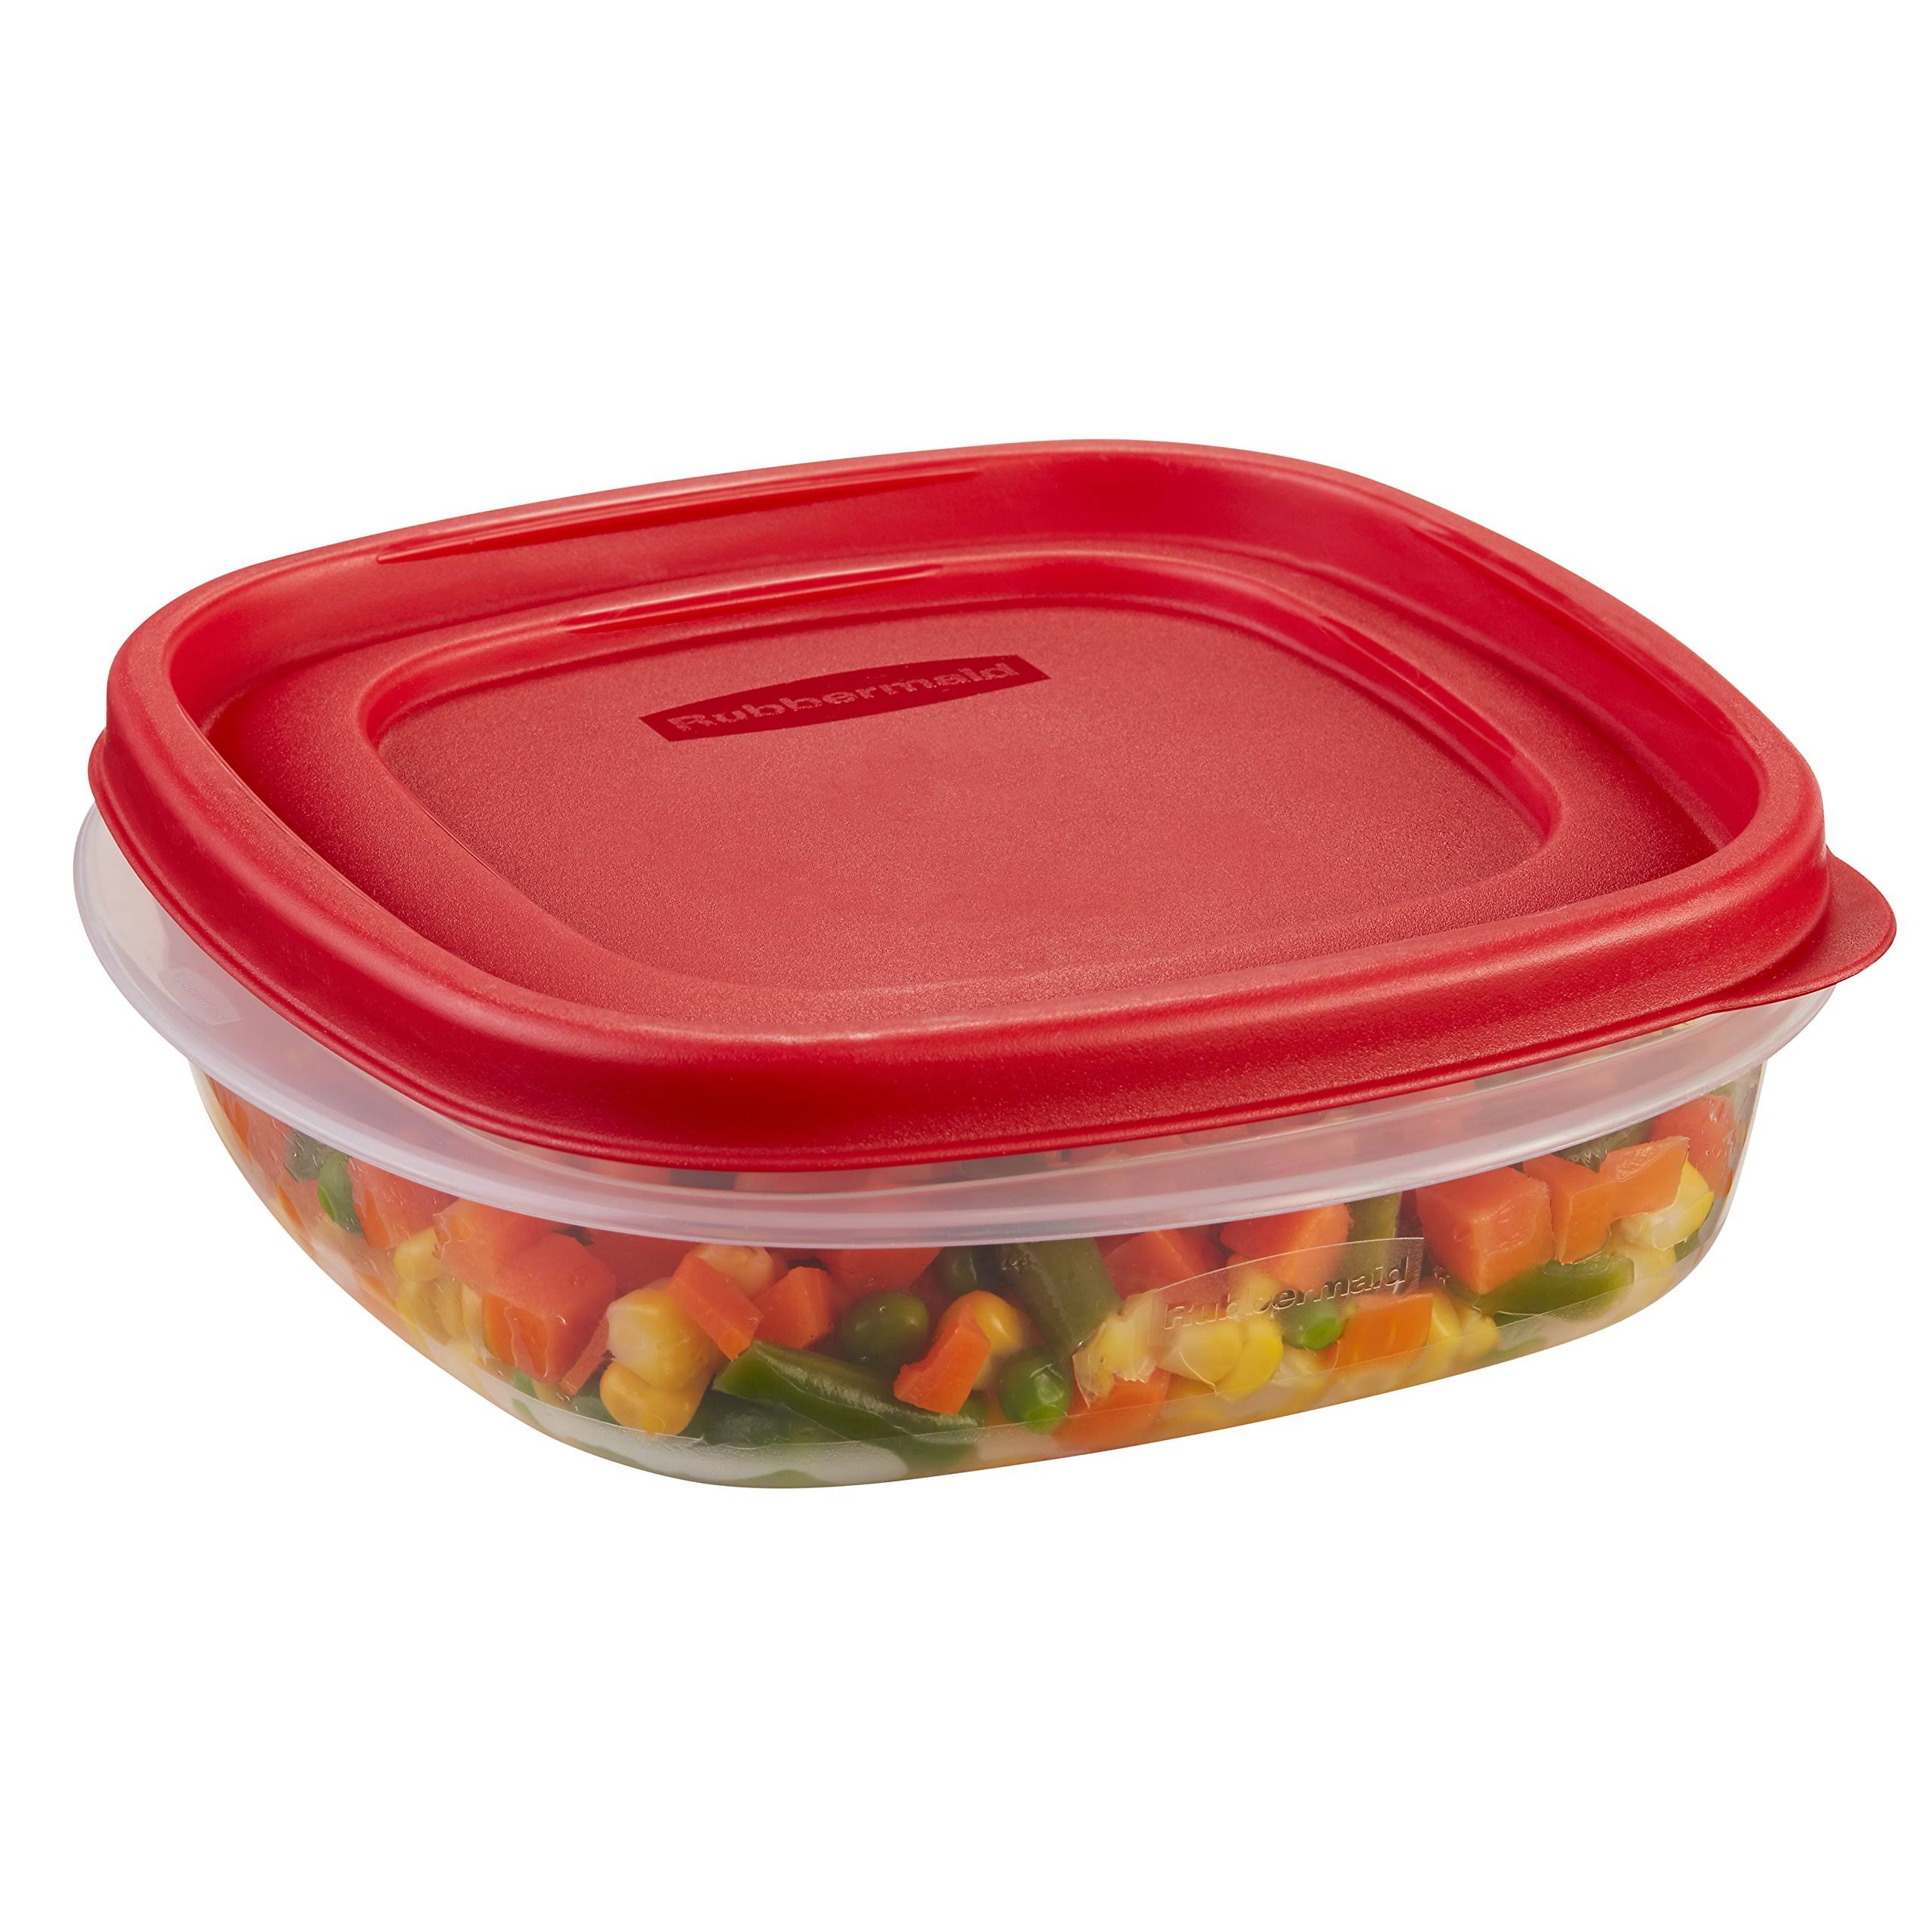 RUBBERMAID - Easy-Find Lids Food Storage Container - 3 Cup